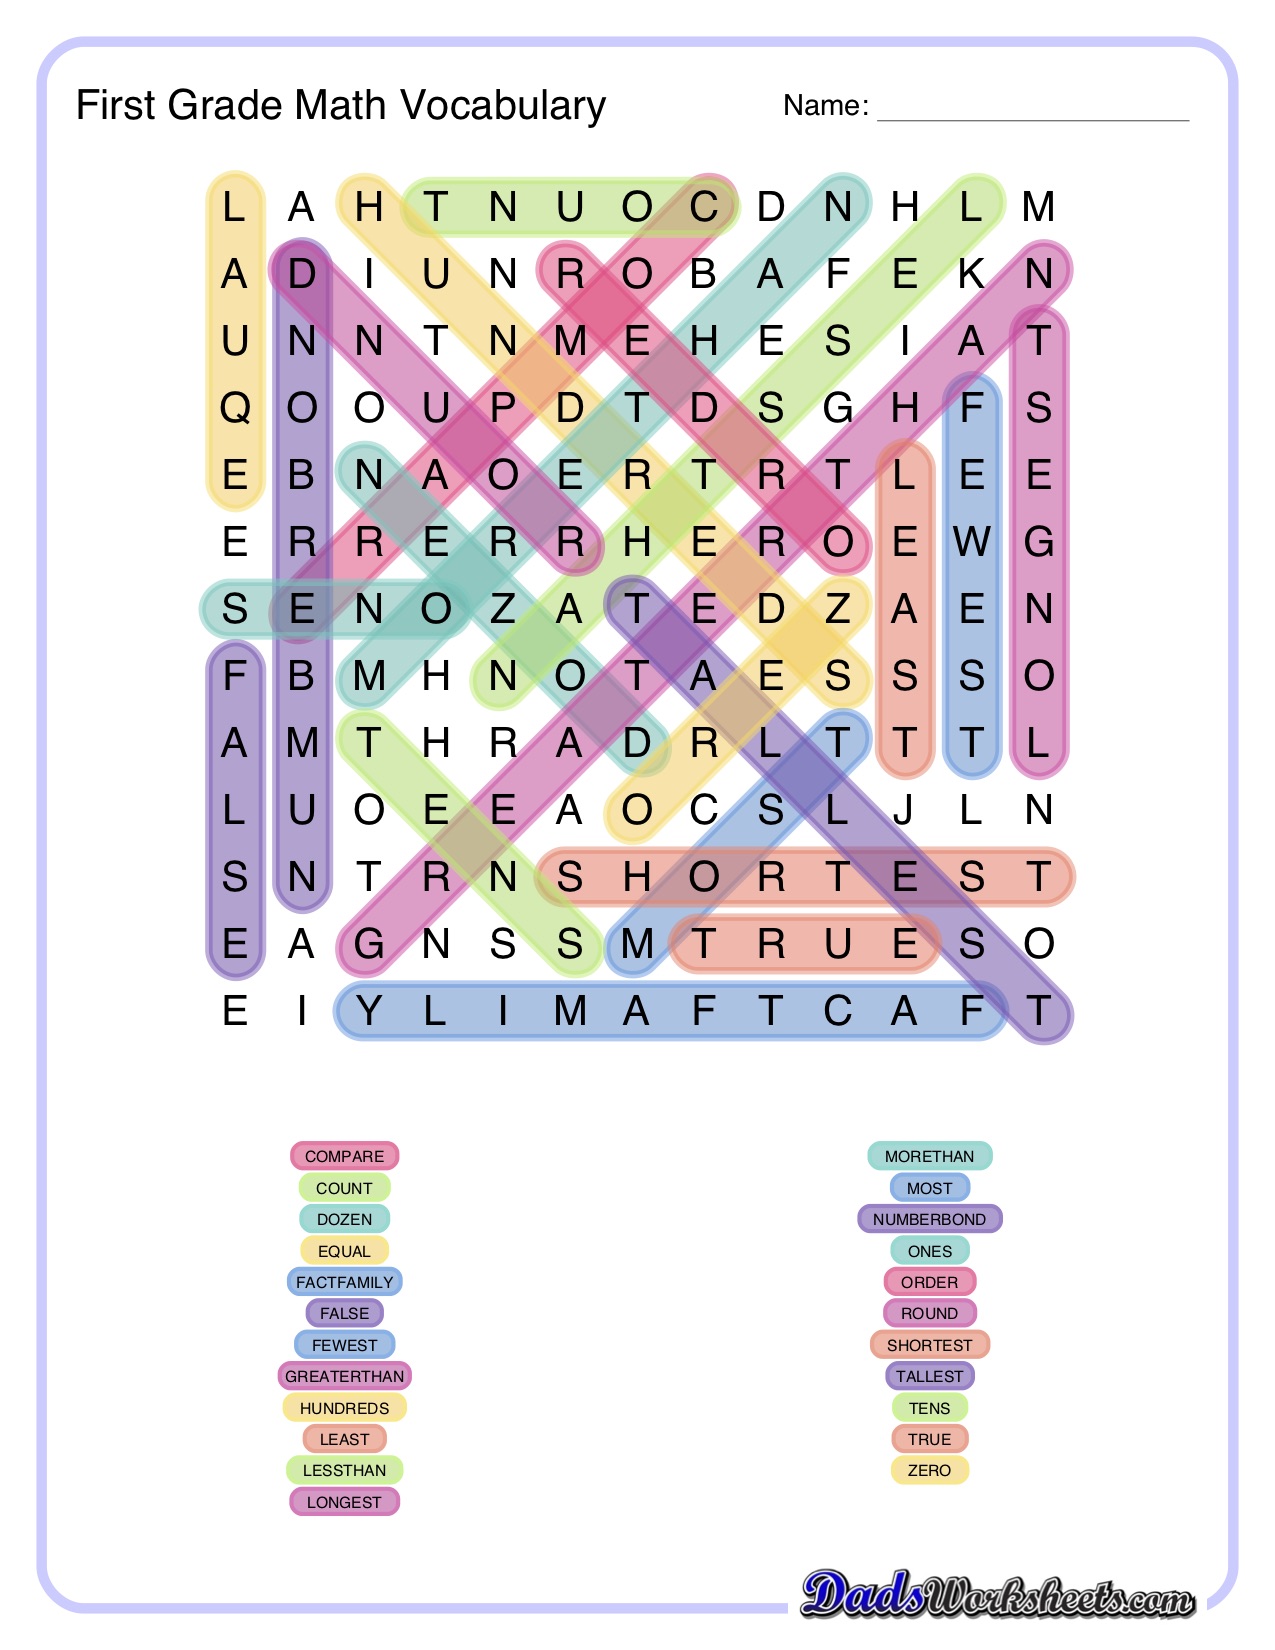 math-word-search-puzzles